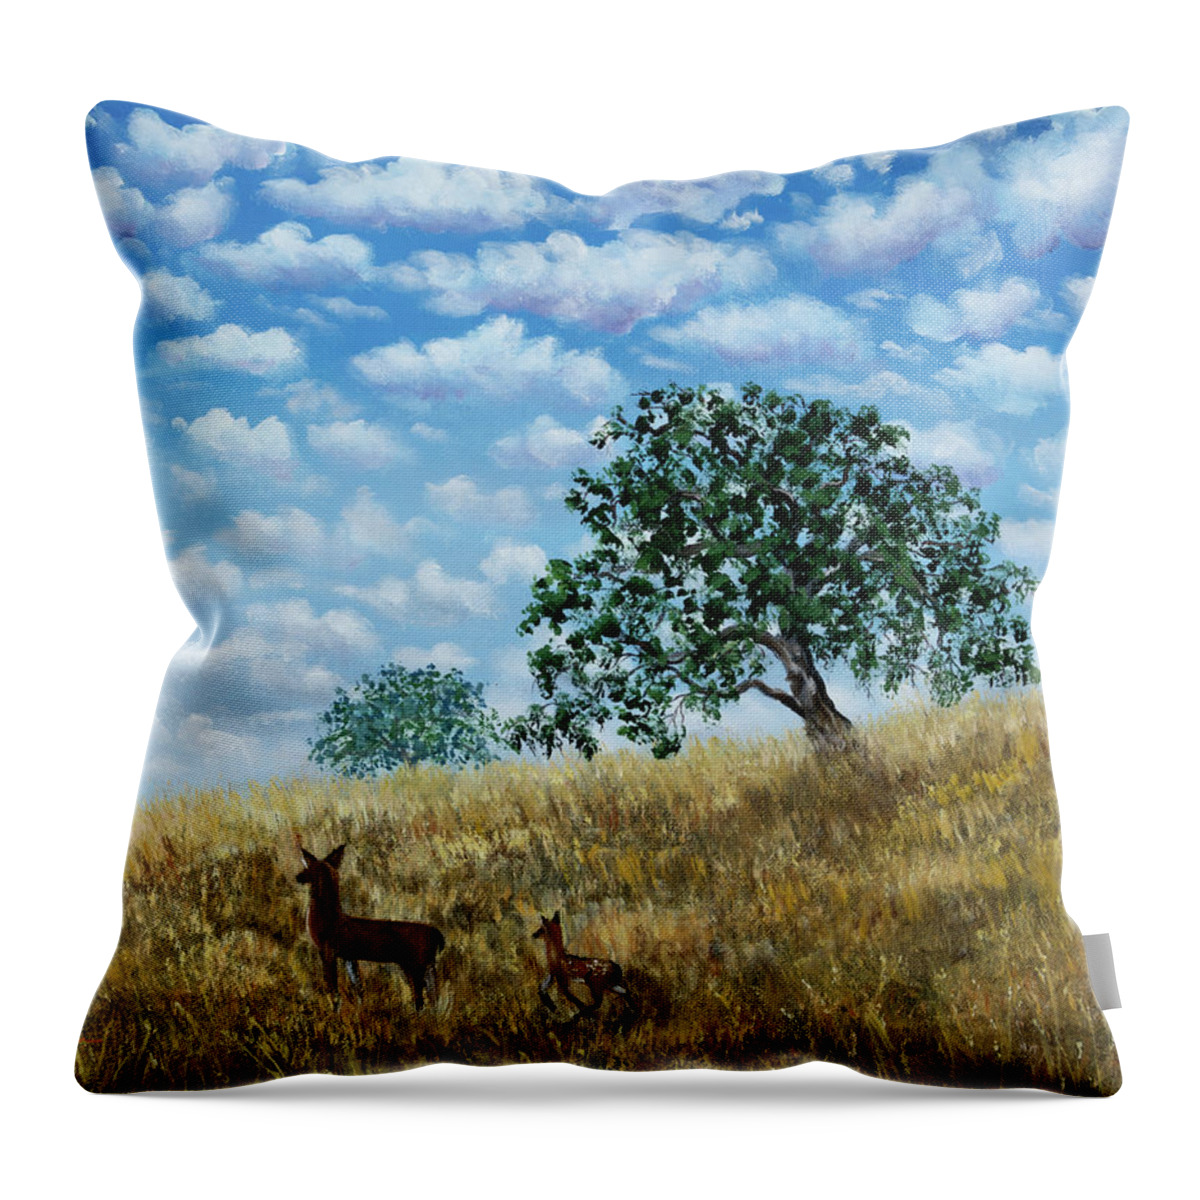 California Throw Pillow featuring the painting Doe and Fawn Under White Fluffy Clouds by Laura Iverson